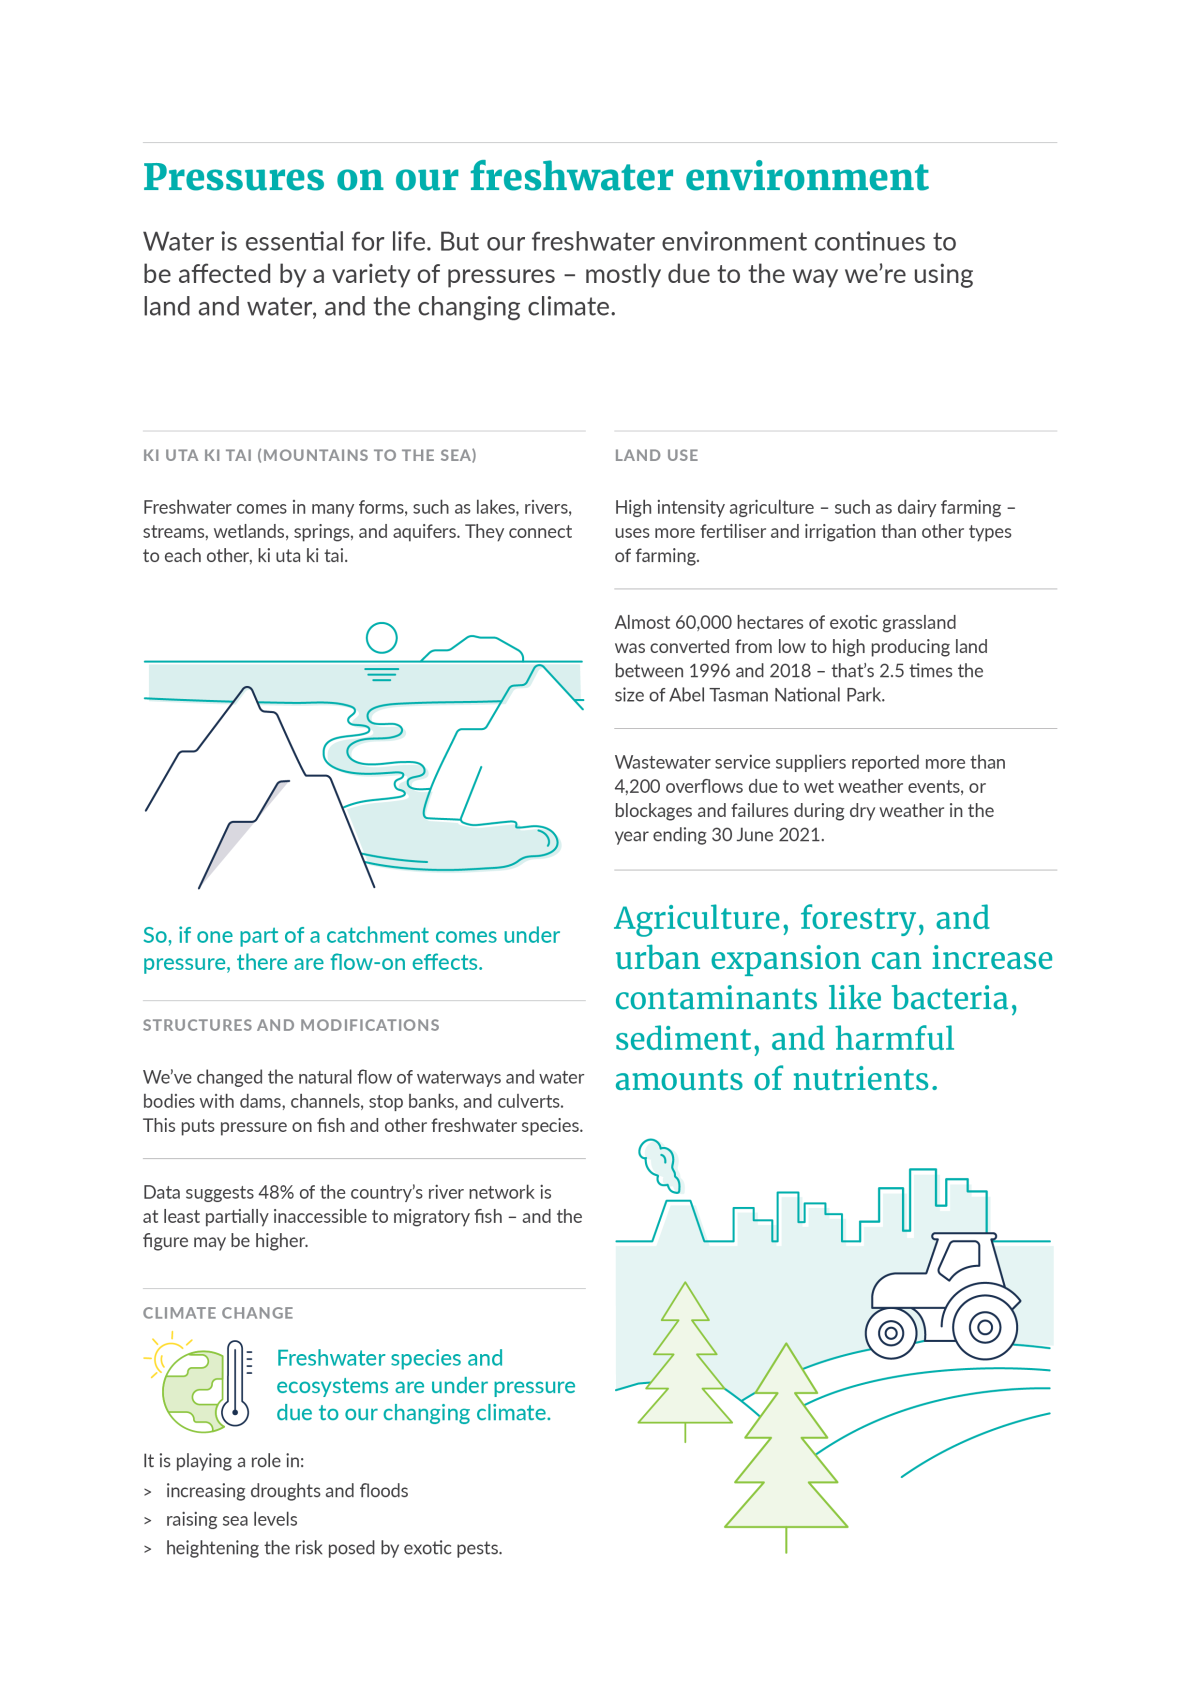 Pressures on our freshwater environment infographic.  Read the image description for full text.